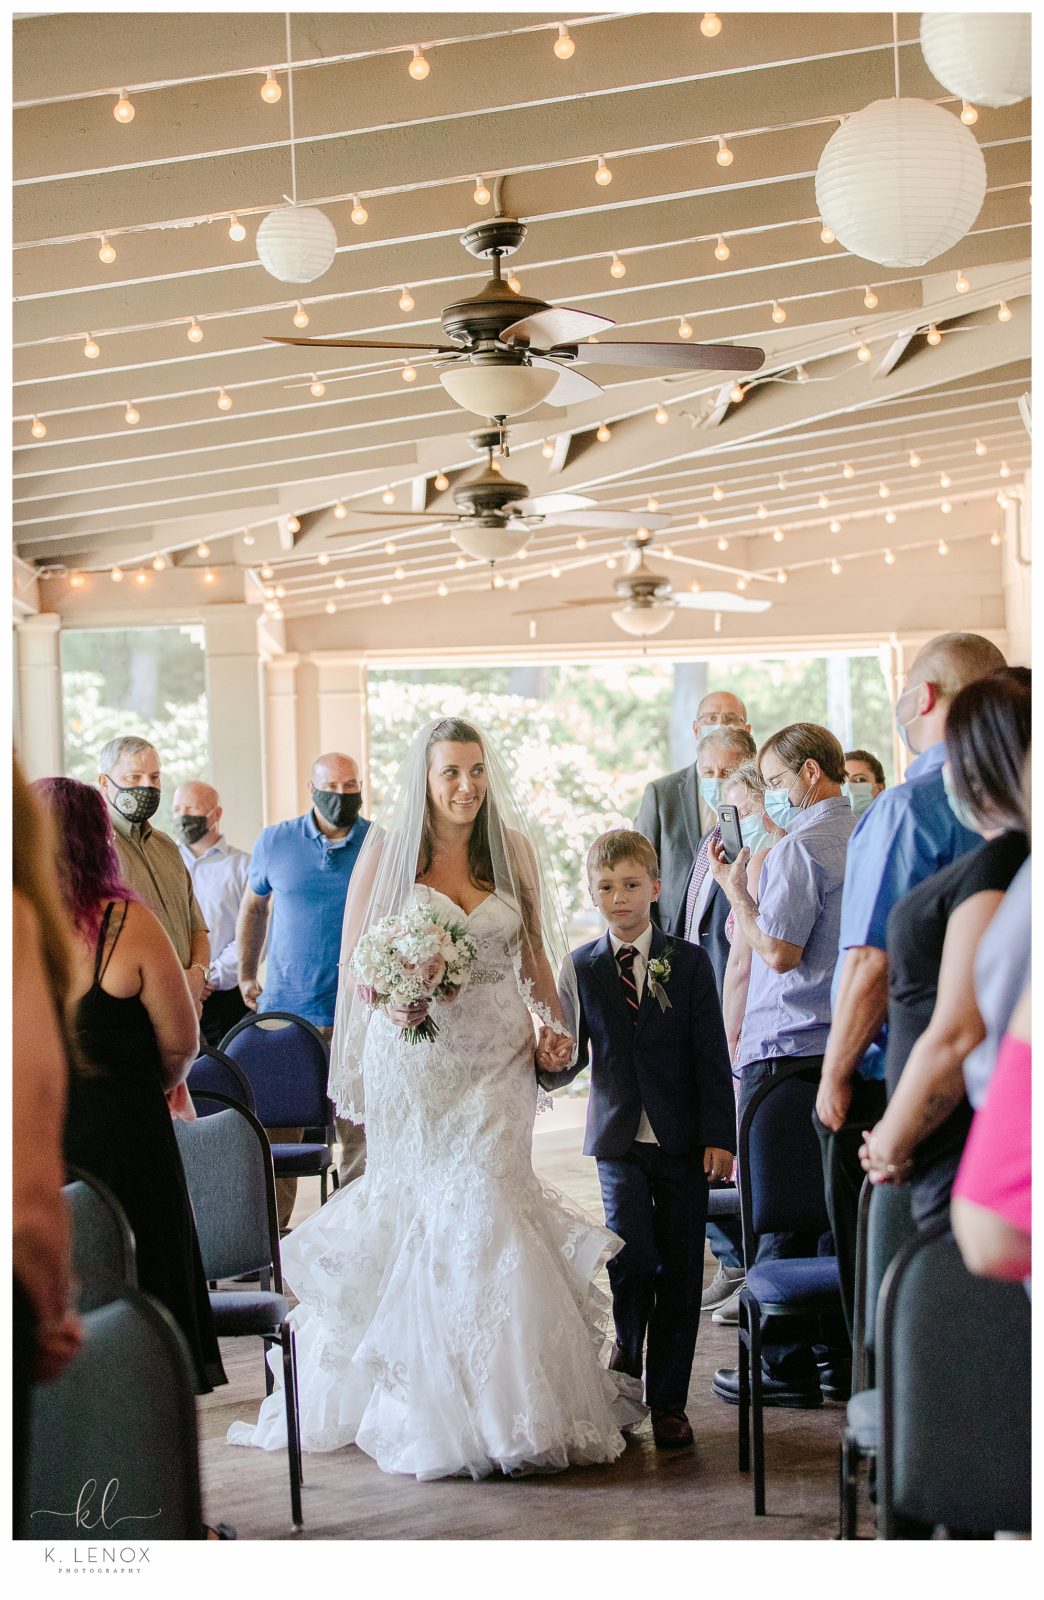 Wedding At The Keene Country Club 0019 1044x1600 